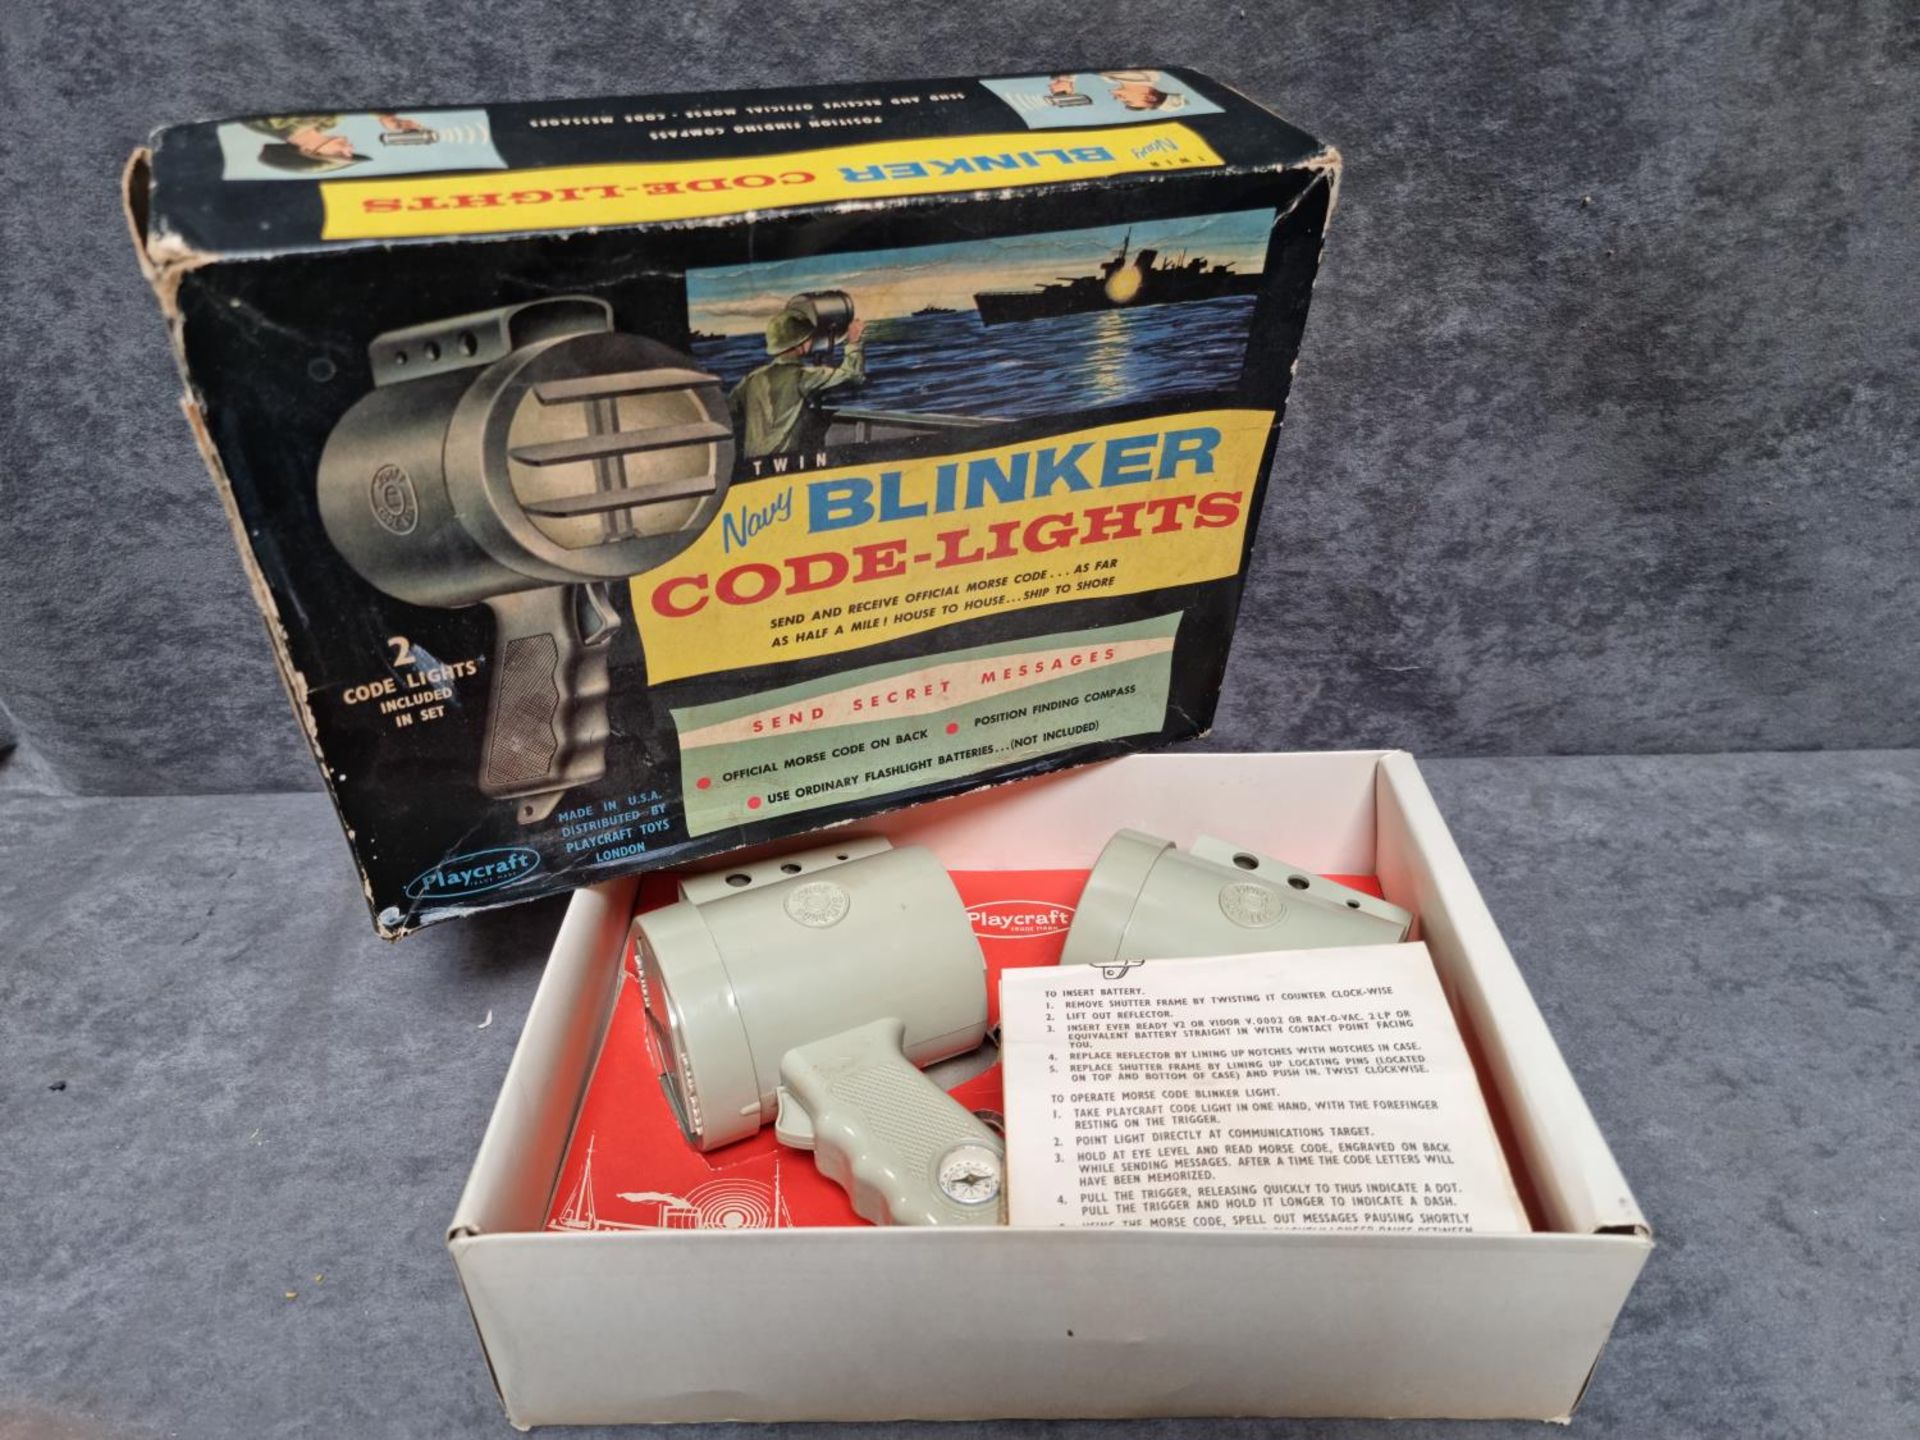 Playcarft Toys London #7230 Twin Navy Blinker Code Lights Playcraft Was Founded In 1949 By Arthur - Image 2 of 2